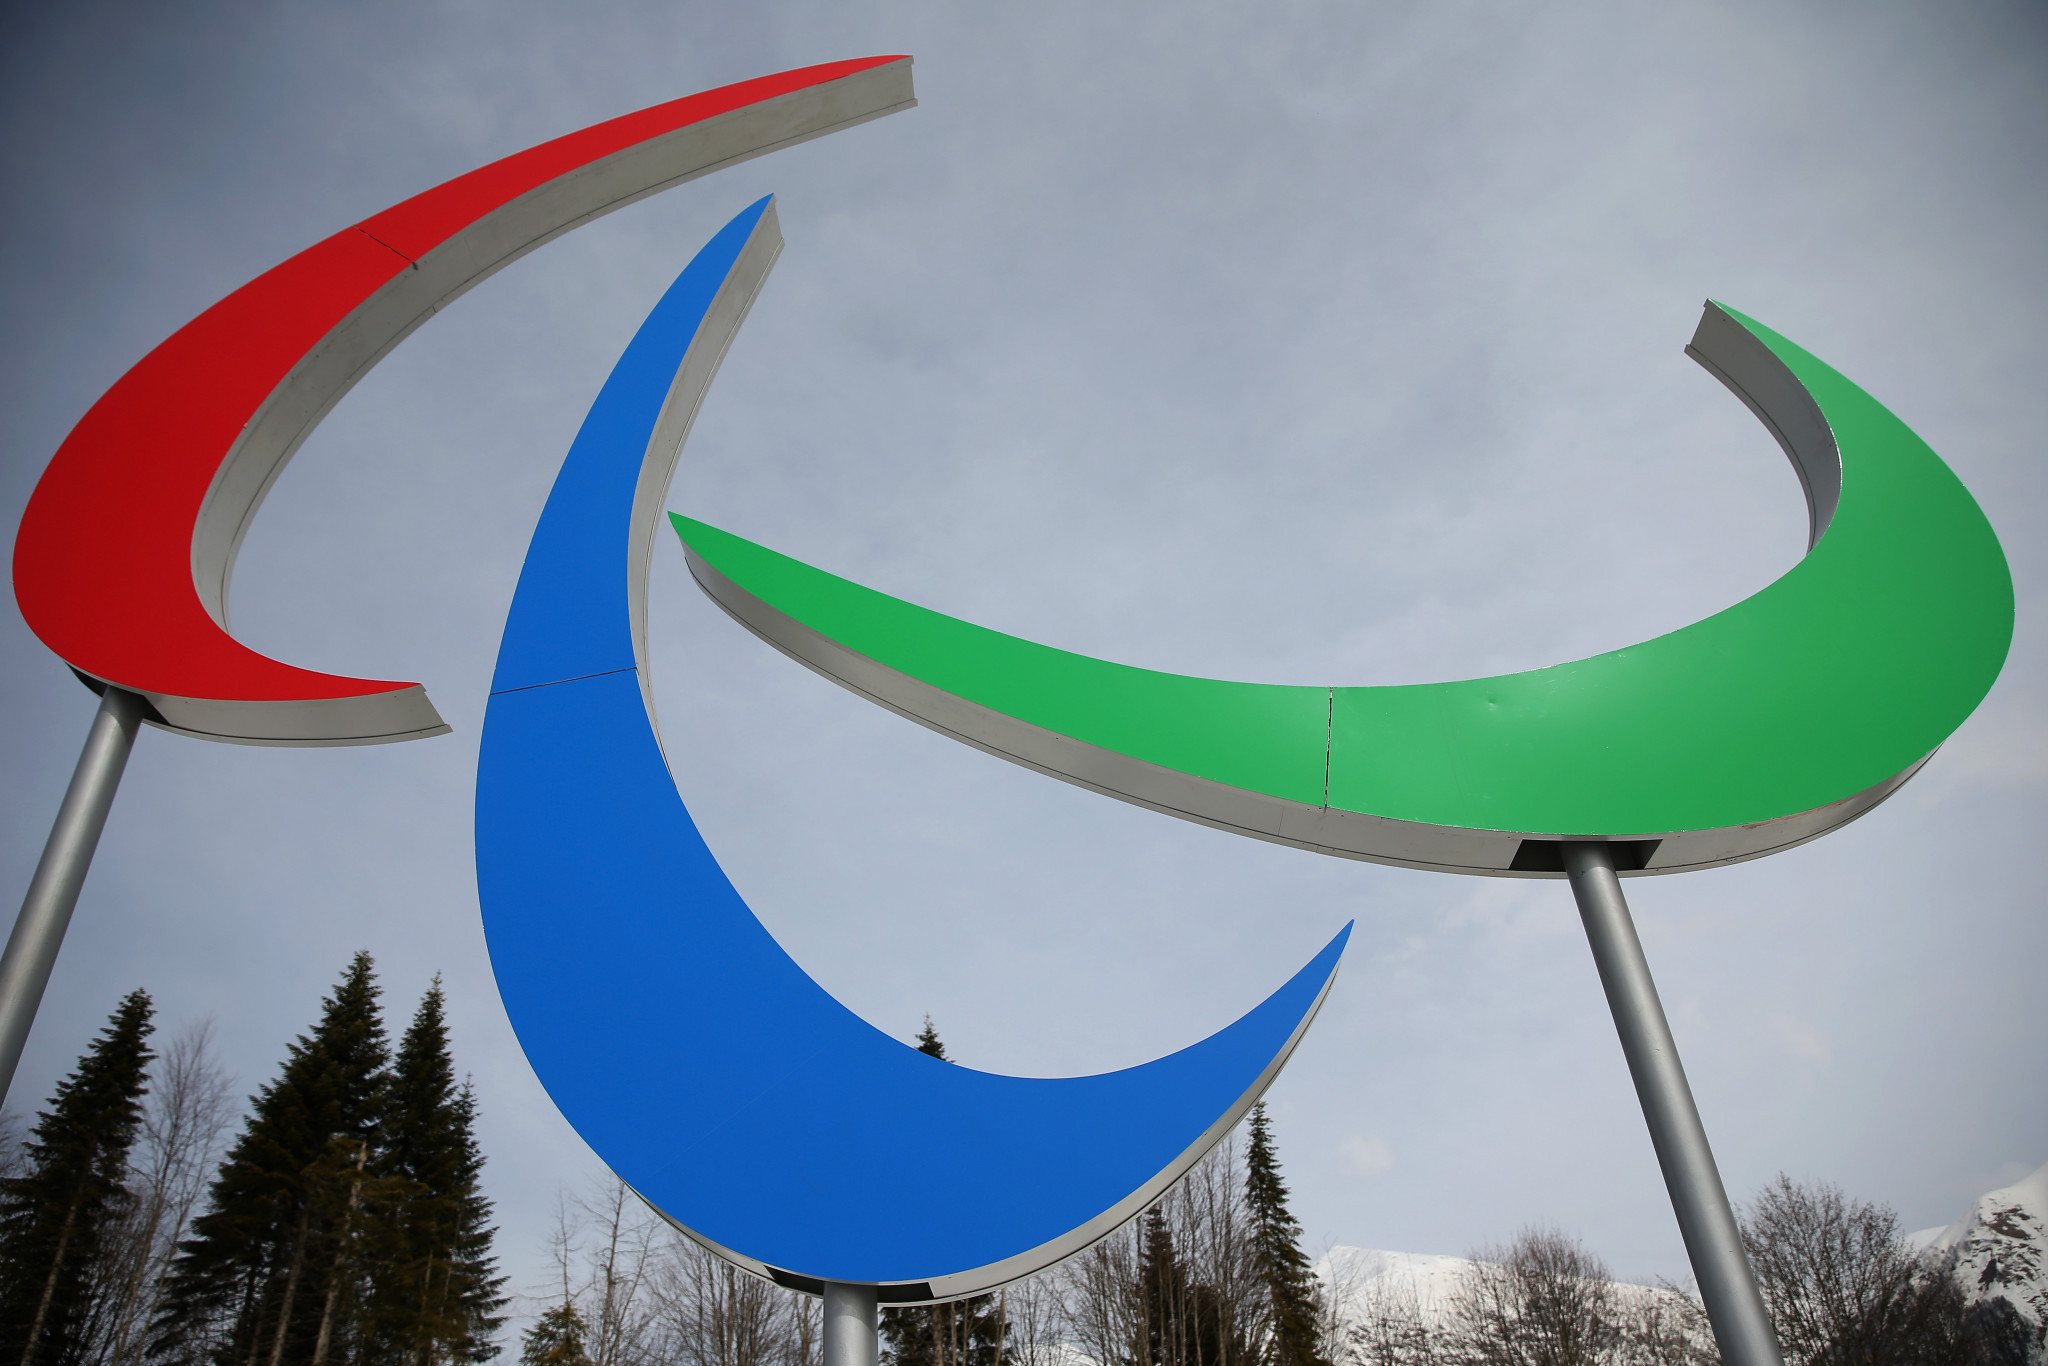 IPC and Pyeongchang 2018 praise Actualising the Dream Project